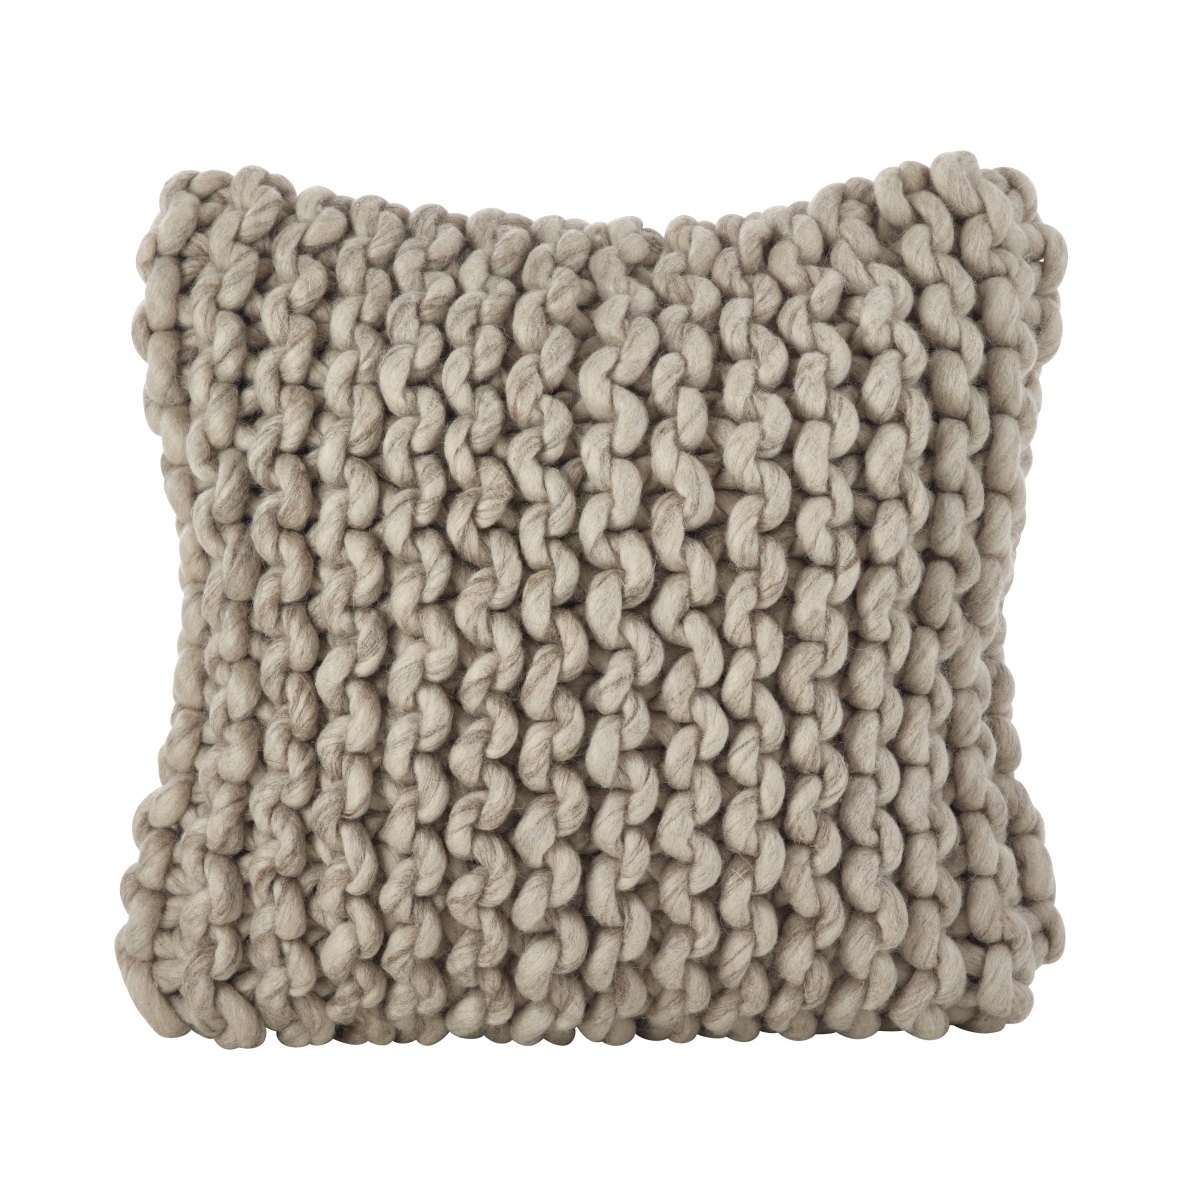 UPC 789323324139 product image for SARO 551.FG18S 18 in. Square Chunky Cable Knit Design Accent Cushion Wool Down F | upcitemdb.com